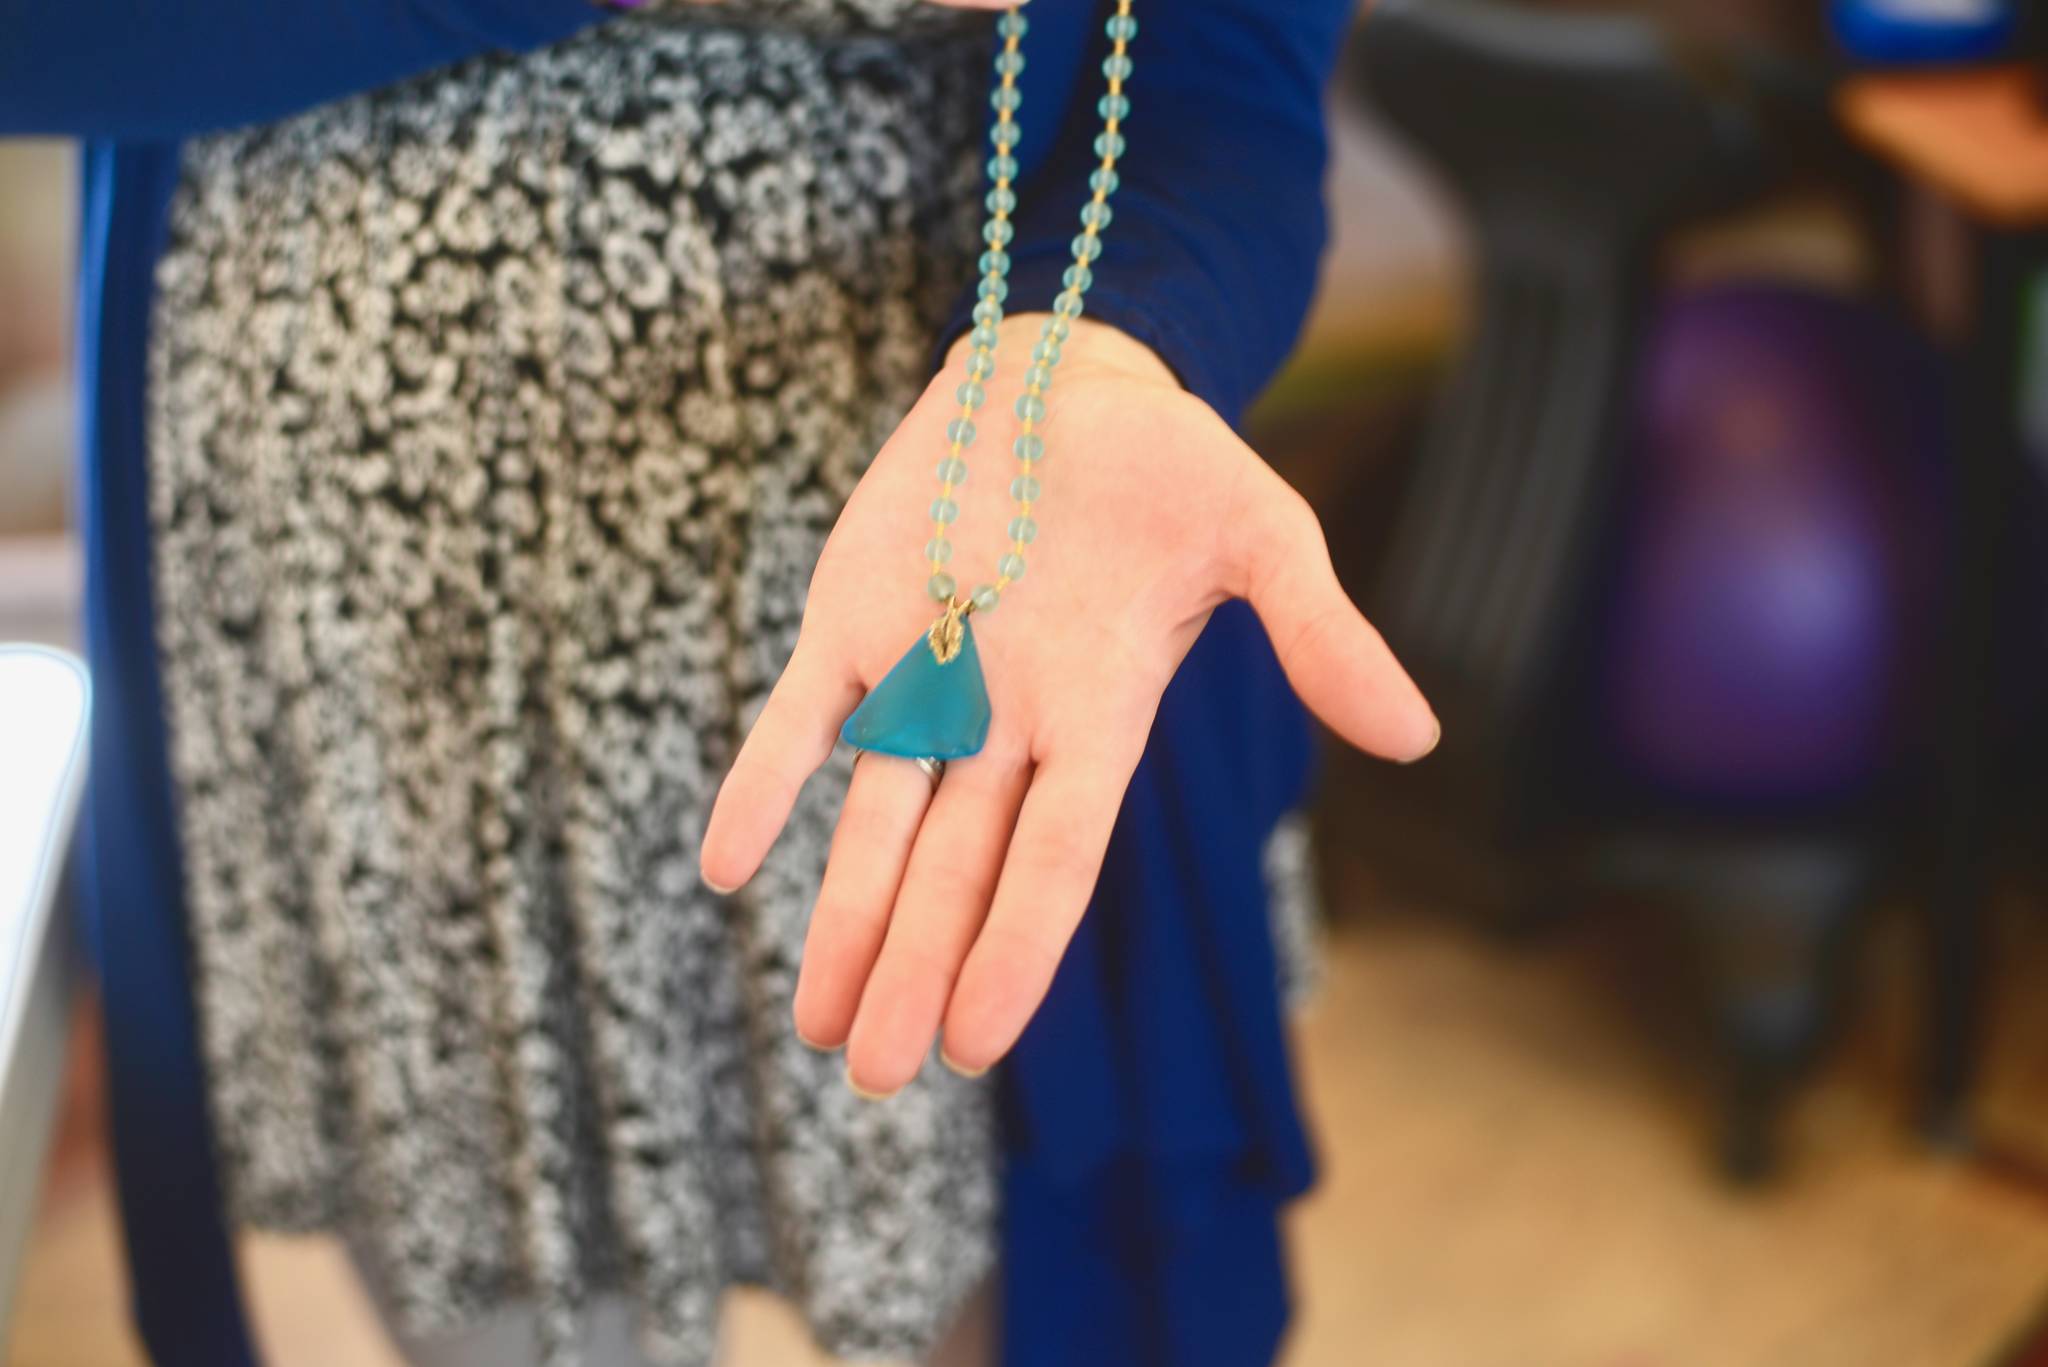 Jenna Bedford presents her first Alaska Sea Glass creation, which she wore as part of her Caring for the Kenai project in 2012, on Friday, July 27, 2018, in Nikiski, Alaska. (Photo by Victoria Petersen/Peninsula Clarion)